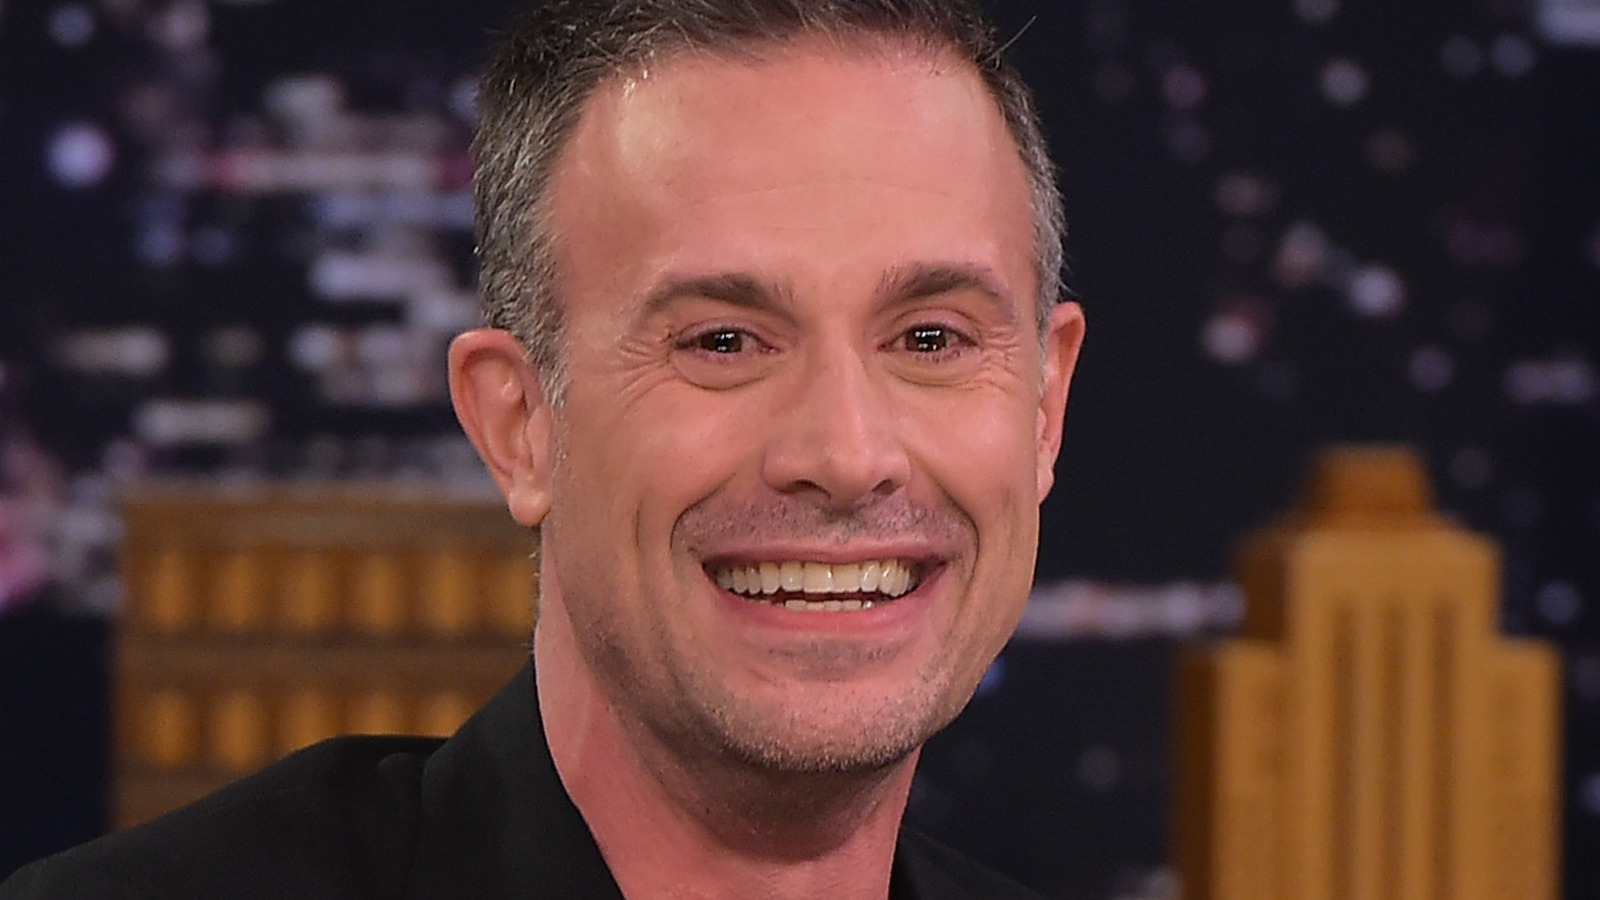 Freddie Prinze Jr. On Why He Got Emotional After Cody Rhodes’ Royal Rumble Win